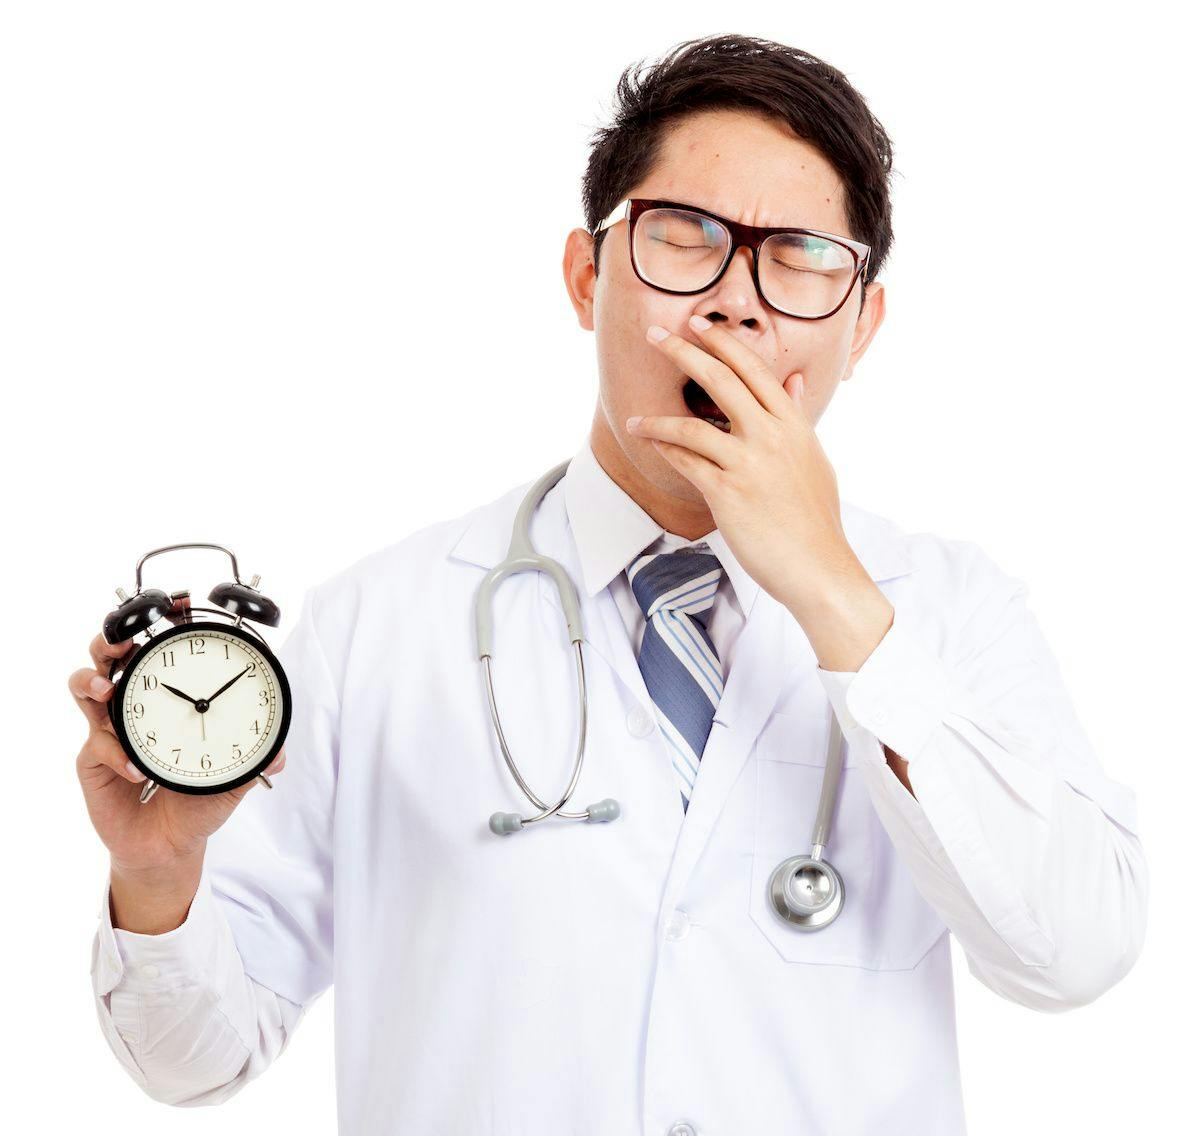 physician doctor yawns with clock: © halfbottle - stock.adobe.com